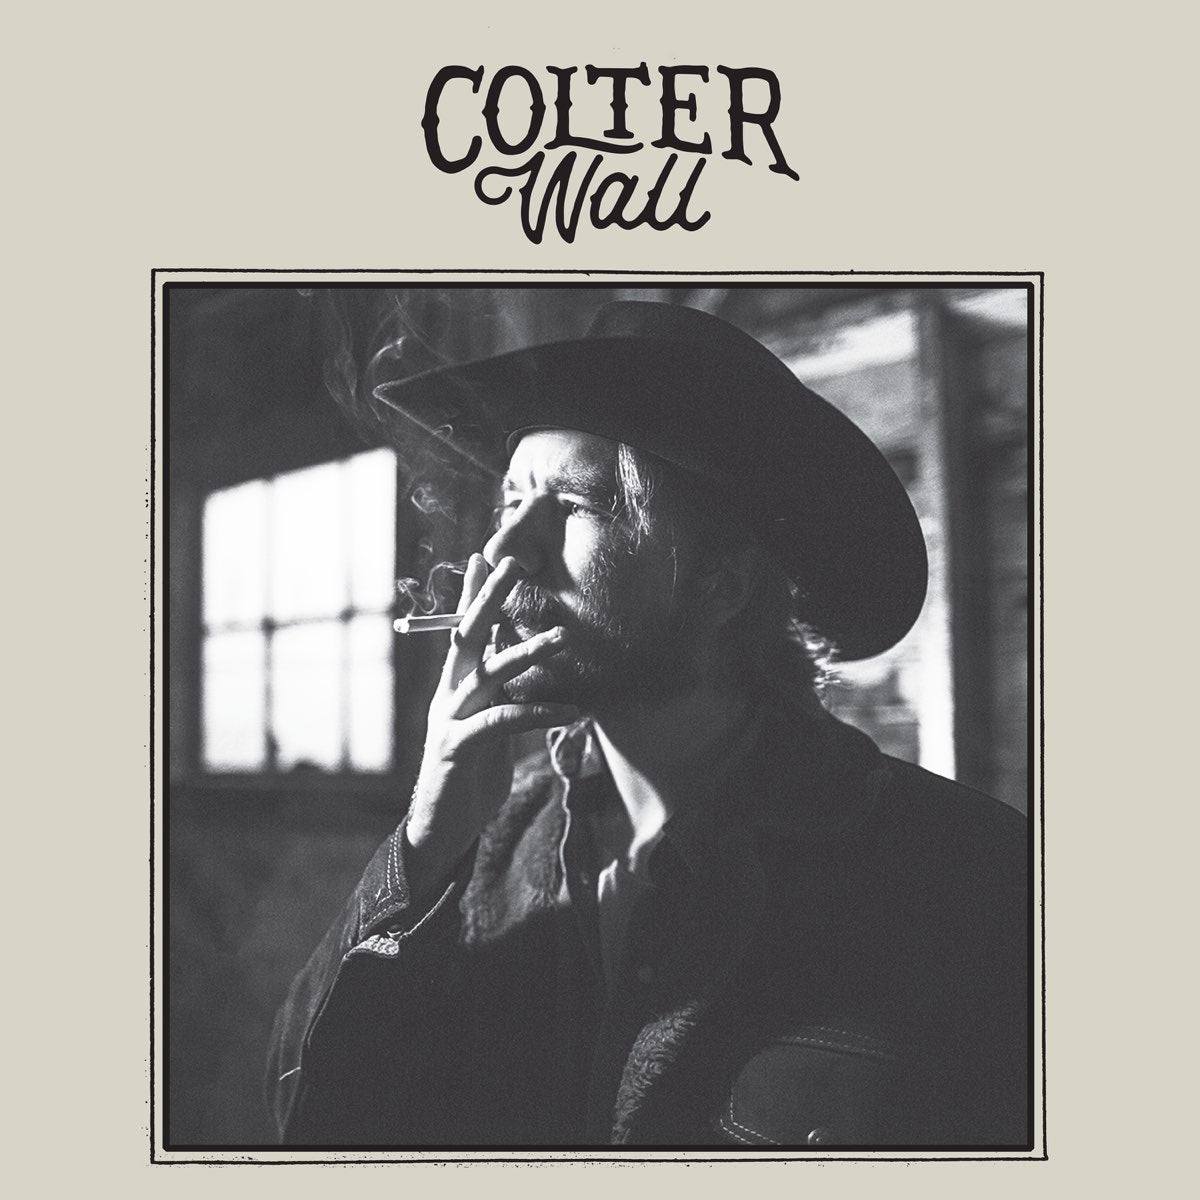 Colter Wall - Colter Wall LP